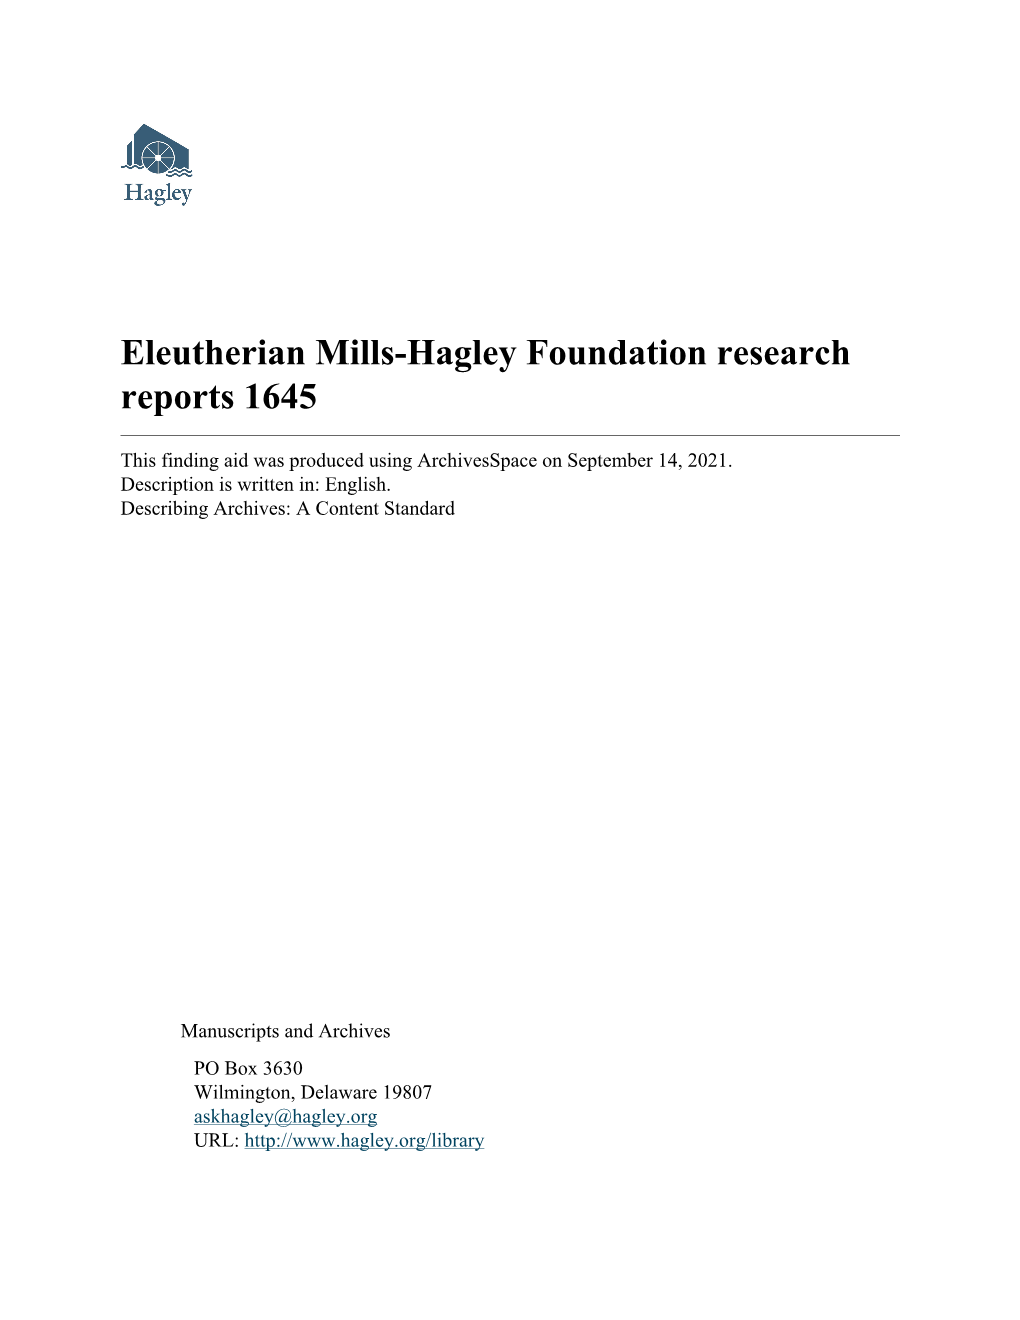 Eleutherian Mills-Hagley Foundation Research Reports 1645